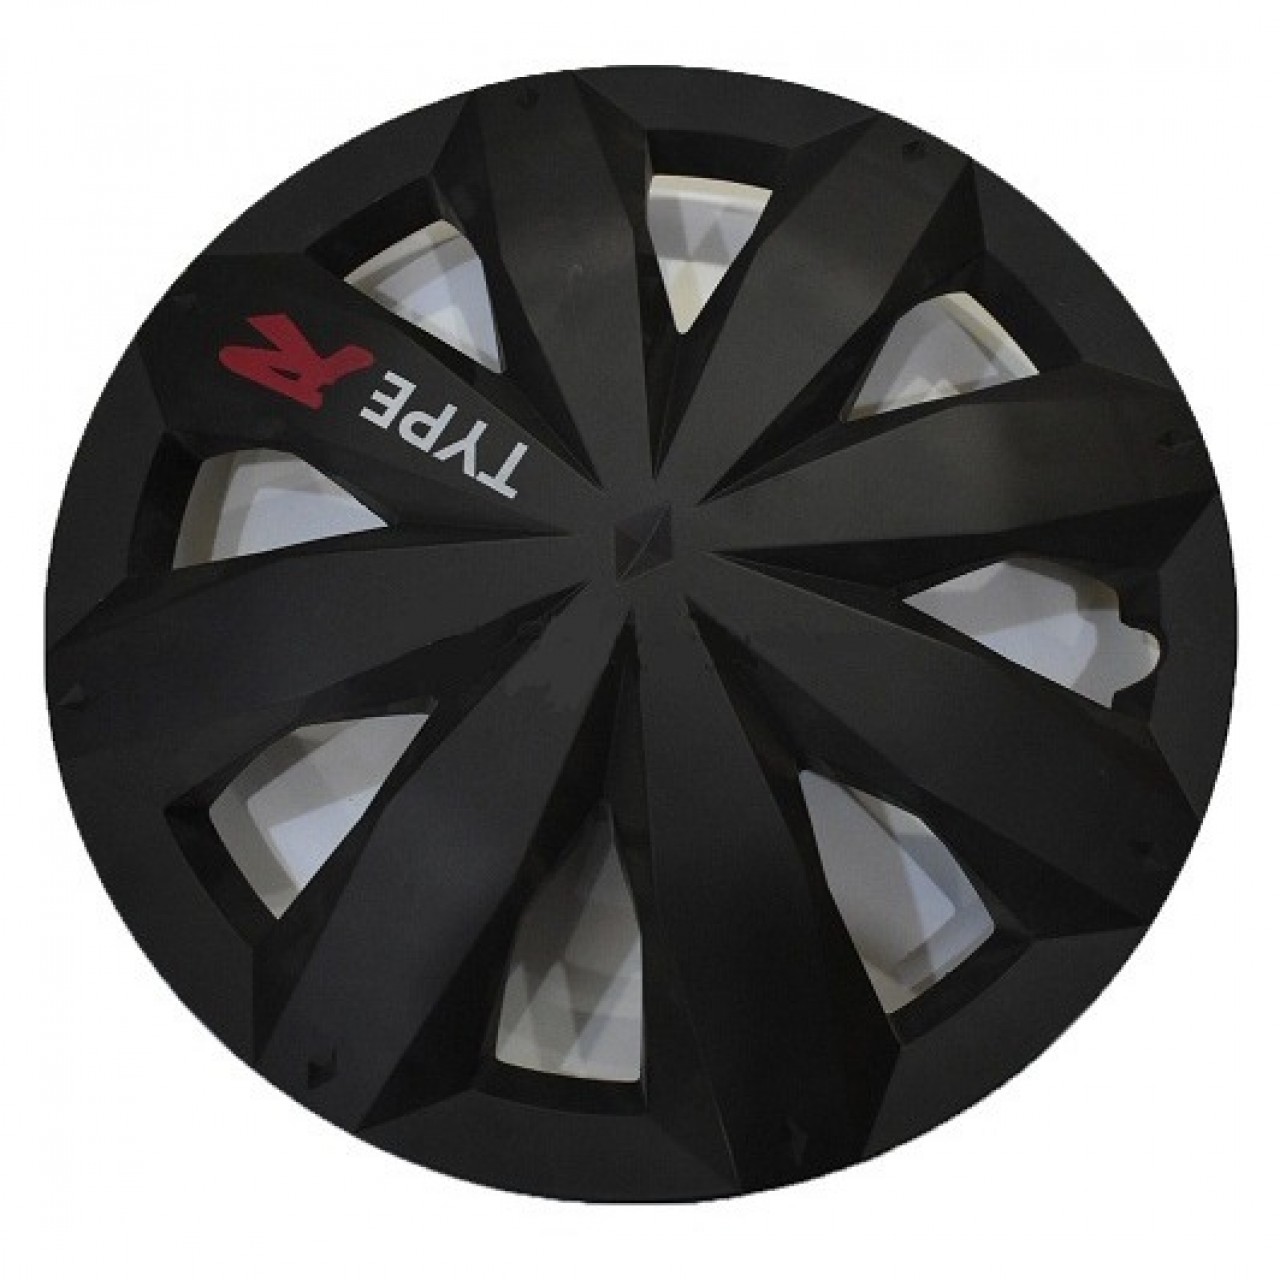 Stylish Type R Wheel Cover - 12 Inches - Black